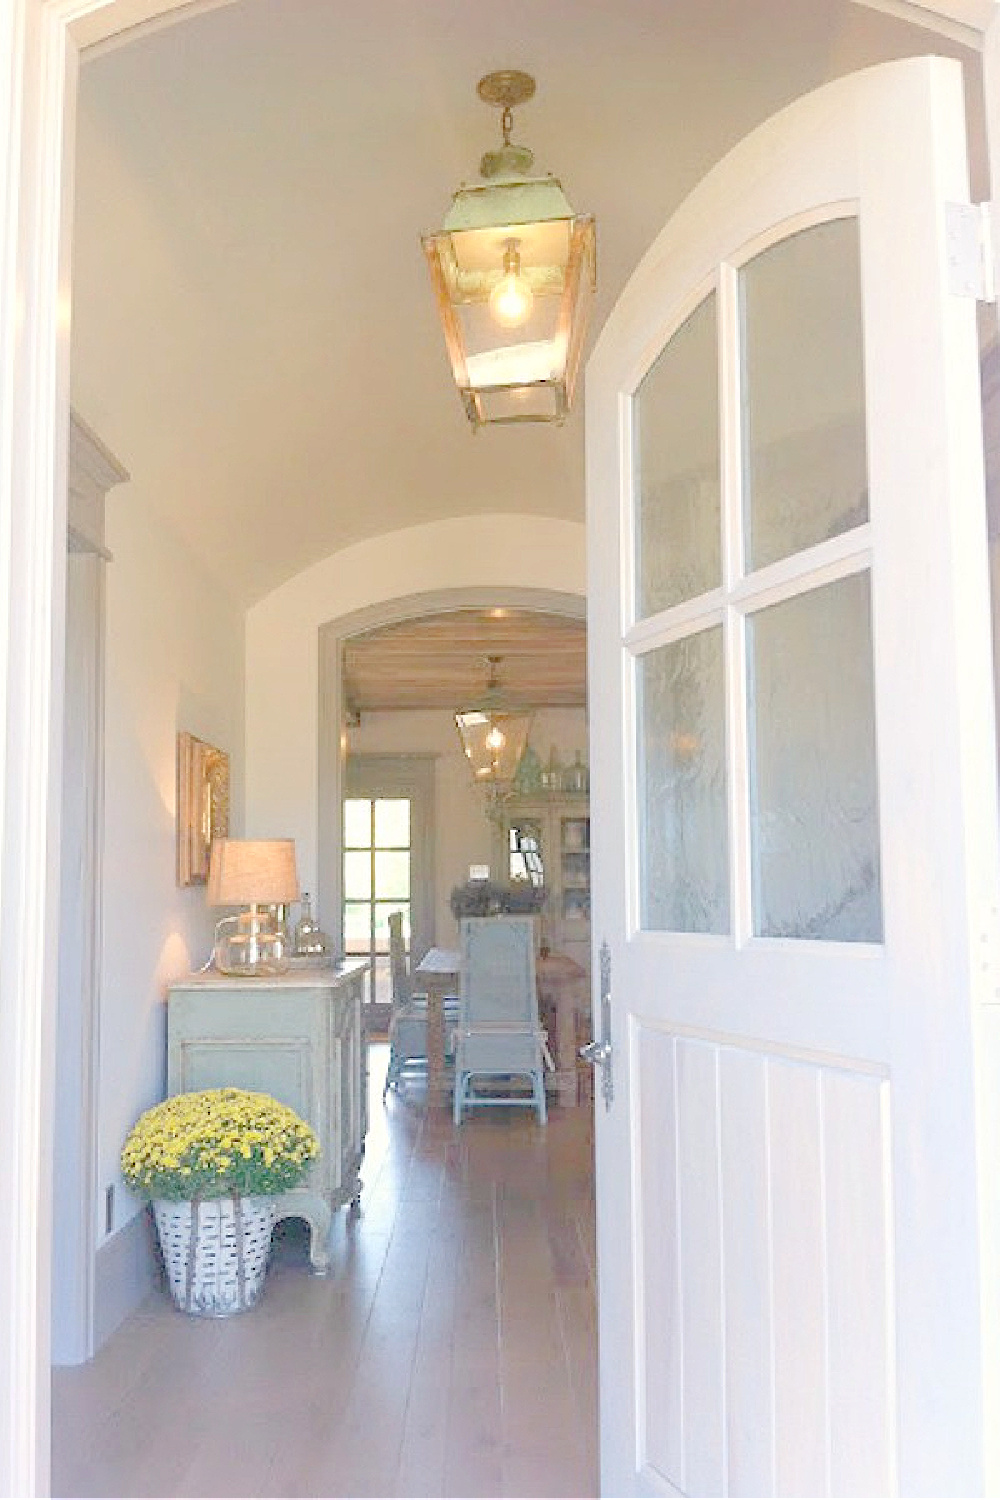 Front door in rustically elegant European country cottage - Desiree of Beljar Home and DecordeProvence. #europeancountry #cottagestyleinteriors